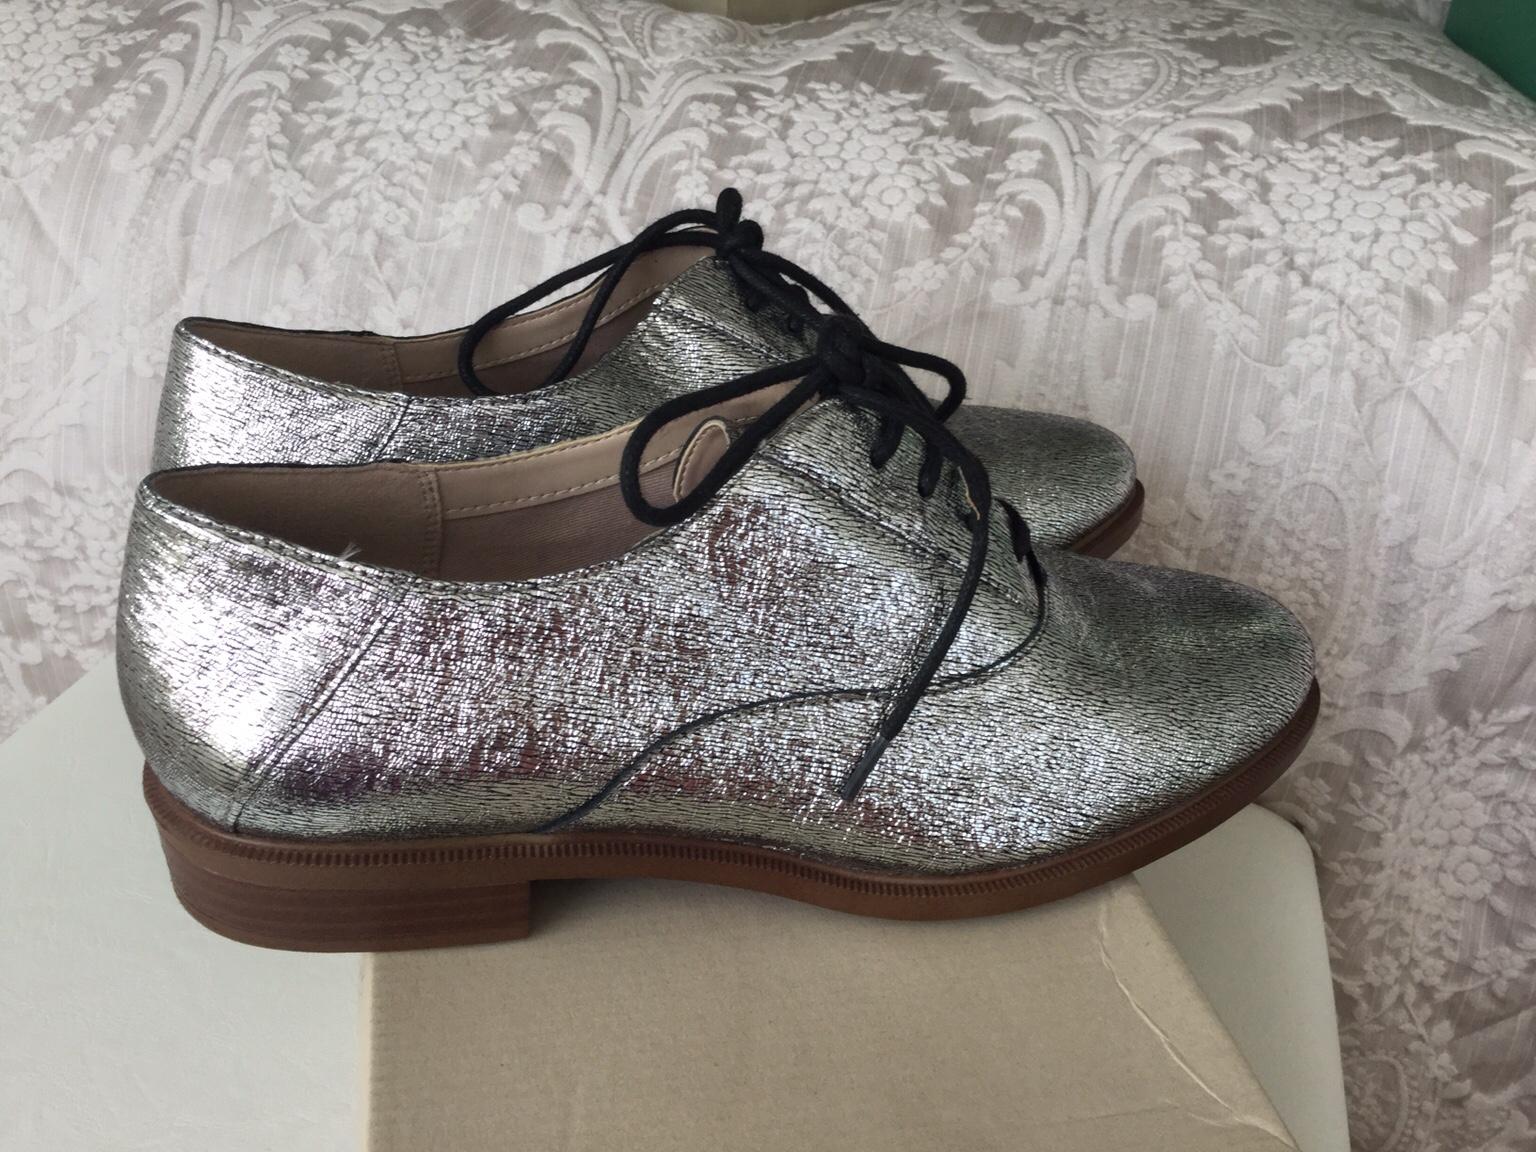 clarks silver brogues